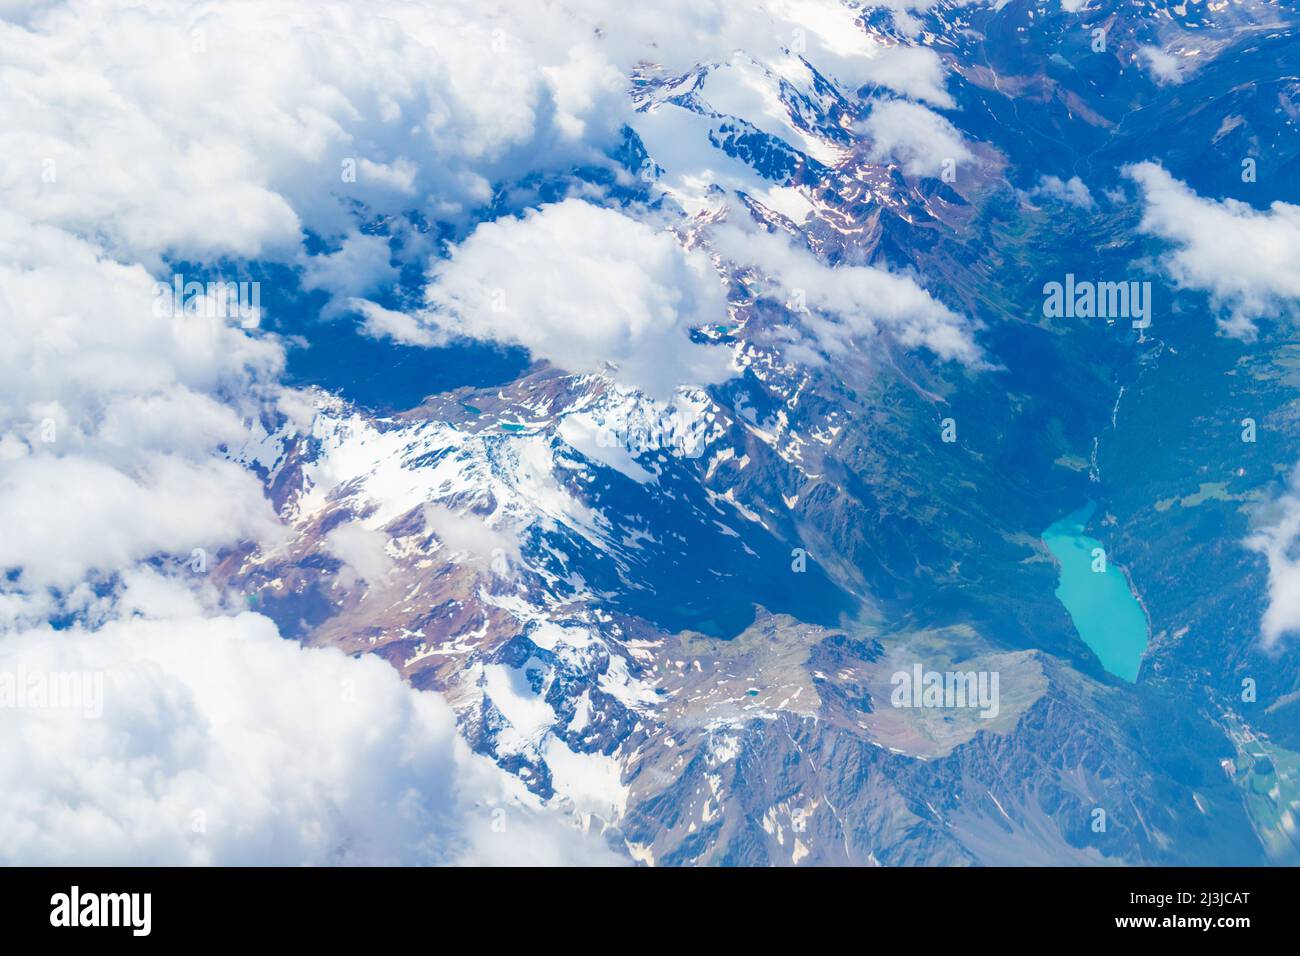 Aerial view of Alps mountains with The Lago Gioveretto Zufrittsee-an artificial lake in the Ortler Alps in South Tyrol.August 2021 Stock Photo